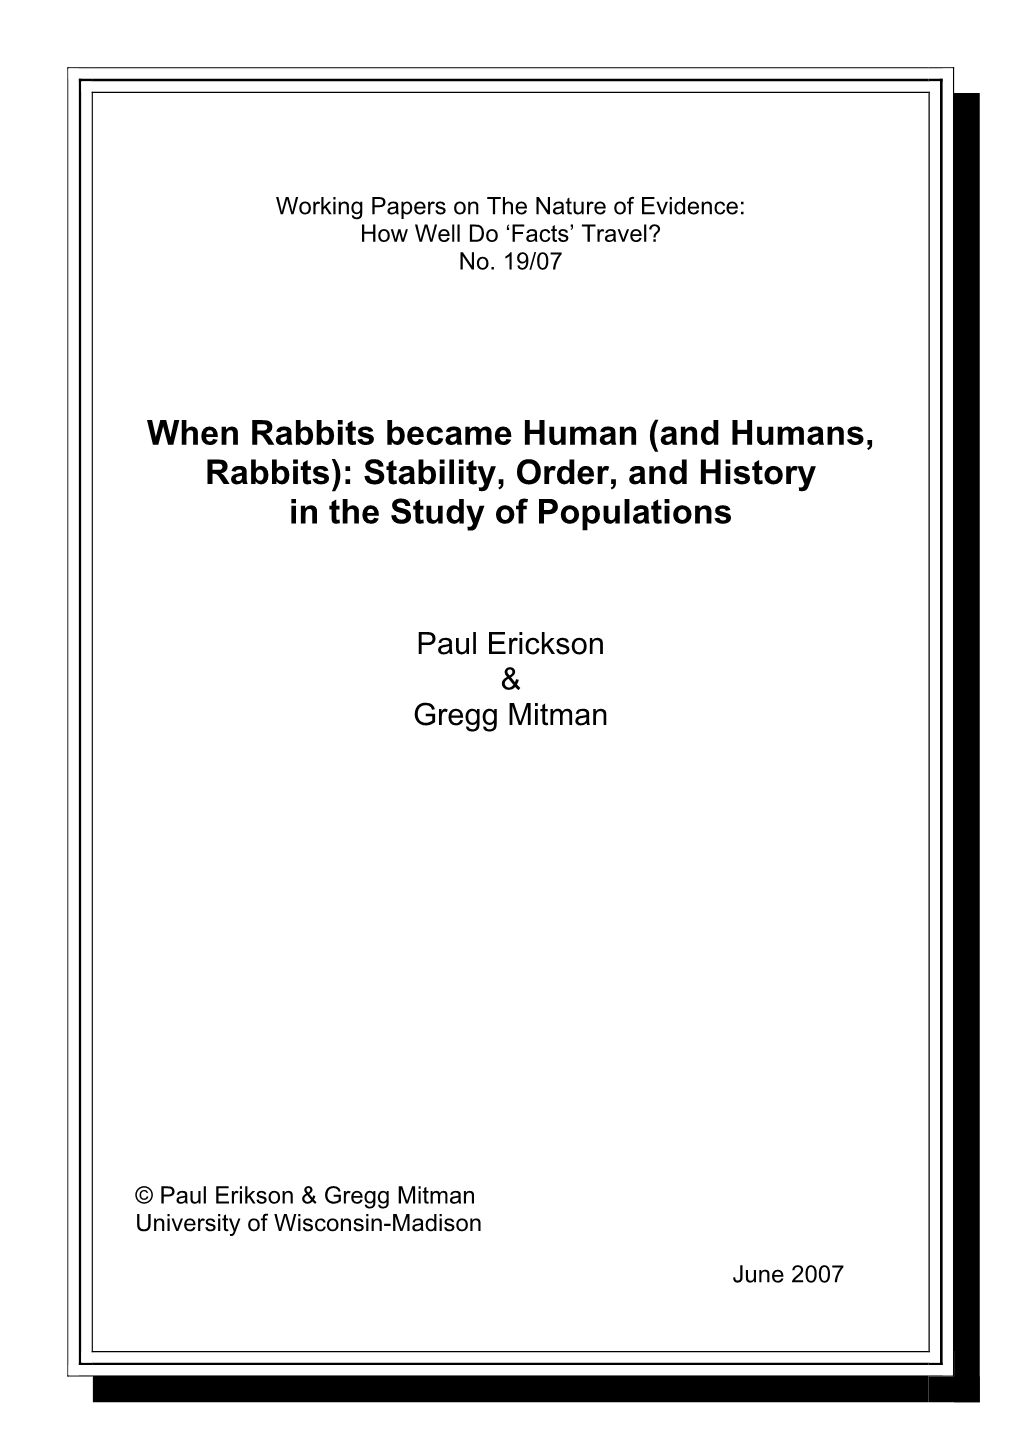 And Humans, Rabbits): Stability, Order, and History in the Study of Populations